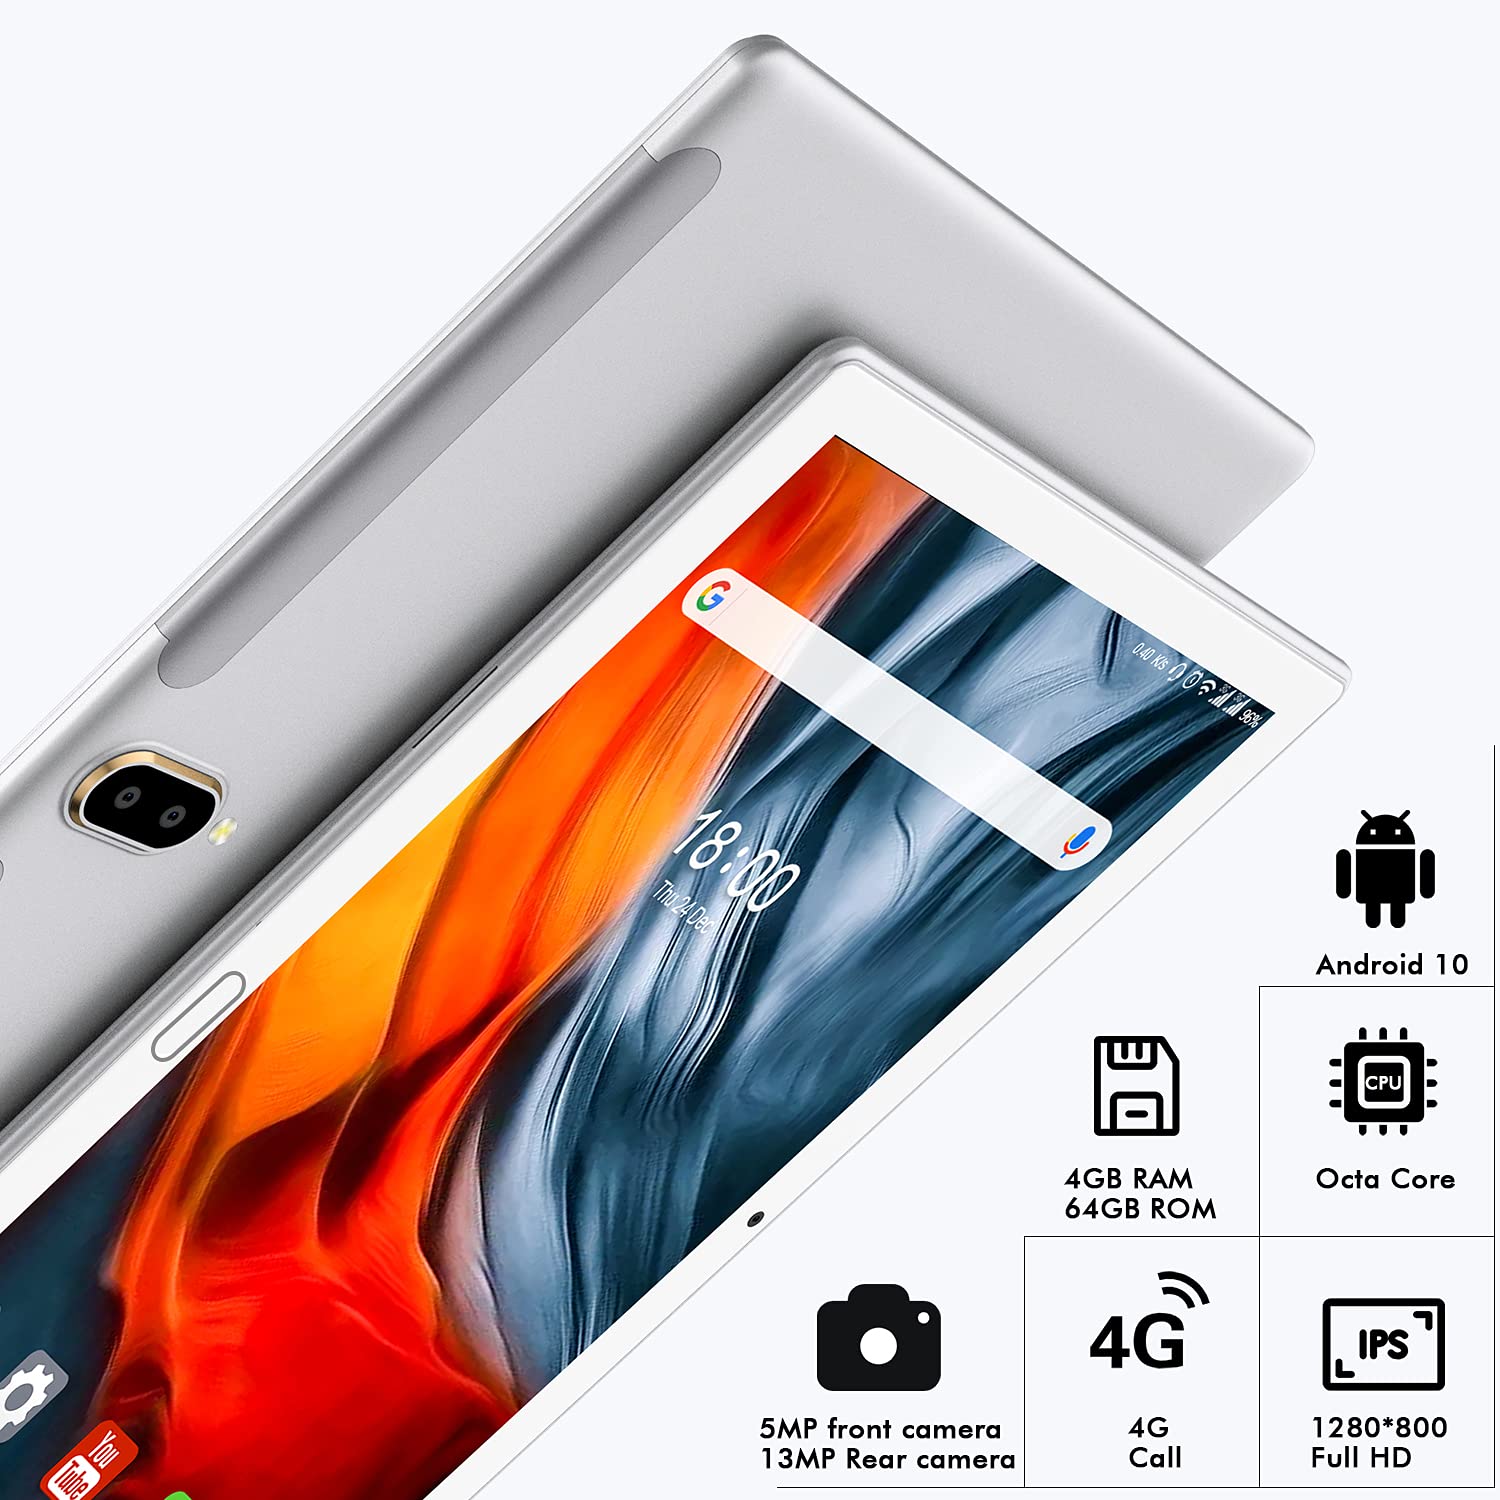 Tablet 10 inch Android 10.0 Tablet PC with 2 SIM Card Slot 4GB RAM 64GB ROM 128GB Expandable Octa Core 1.6GHz 1280x800 IPS 1080P FHD SD Type-C 6000mAh 13 MP Camera Bluetooth WiFi GPS OTG, White